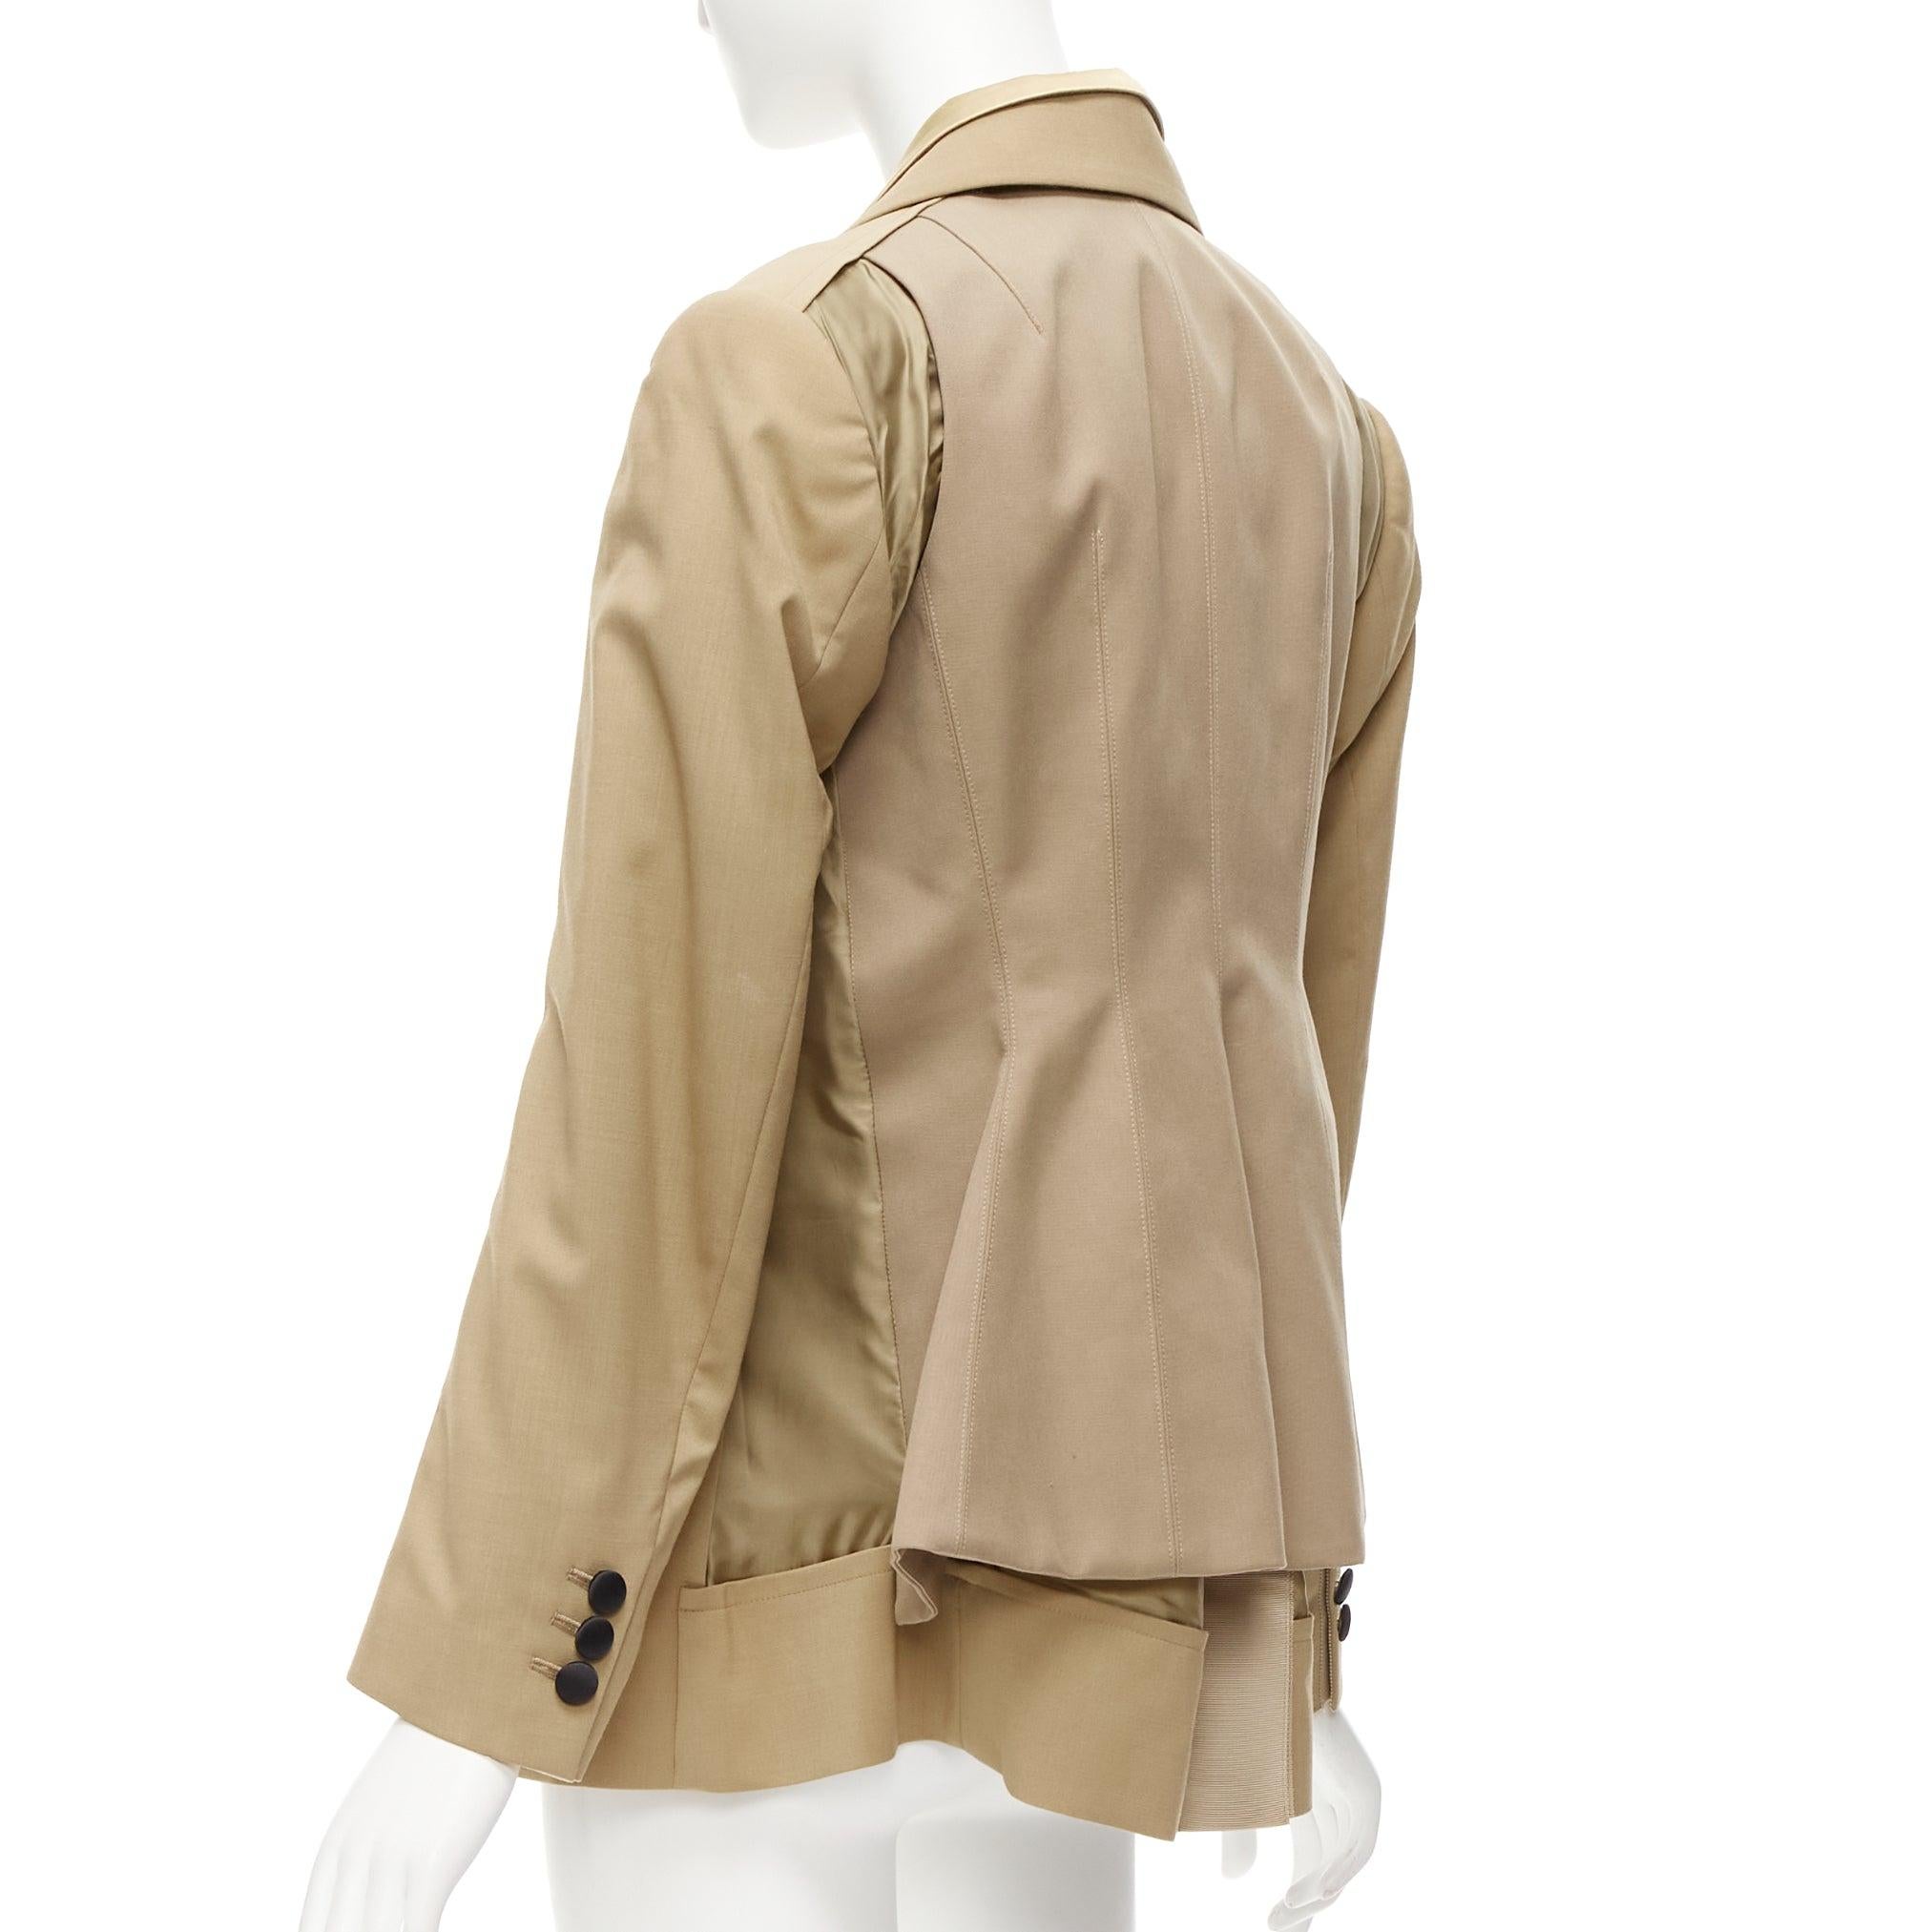 SACAI 2020 beige double collar mixed buttons deconstructed back blazer JP1 S
Reference: DYTG/A00013
Brand: Sacai
Designer: Chitose Abe
Collection: 2020
Material: Polyester, Blend
Color: Beige, Black
Pattern: Solid
Closure: Button
Lining: Beige